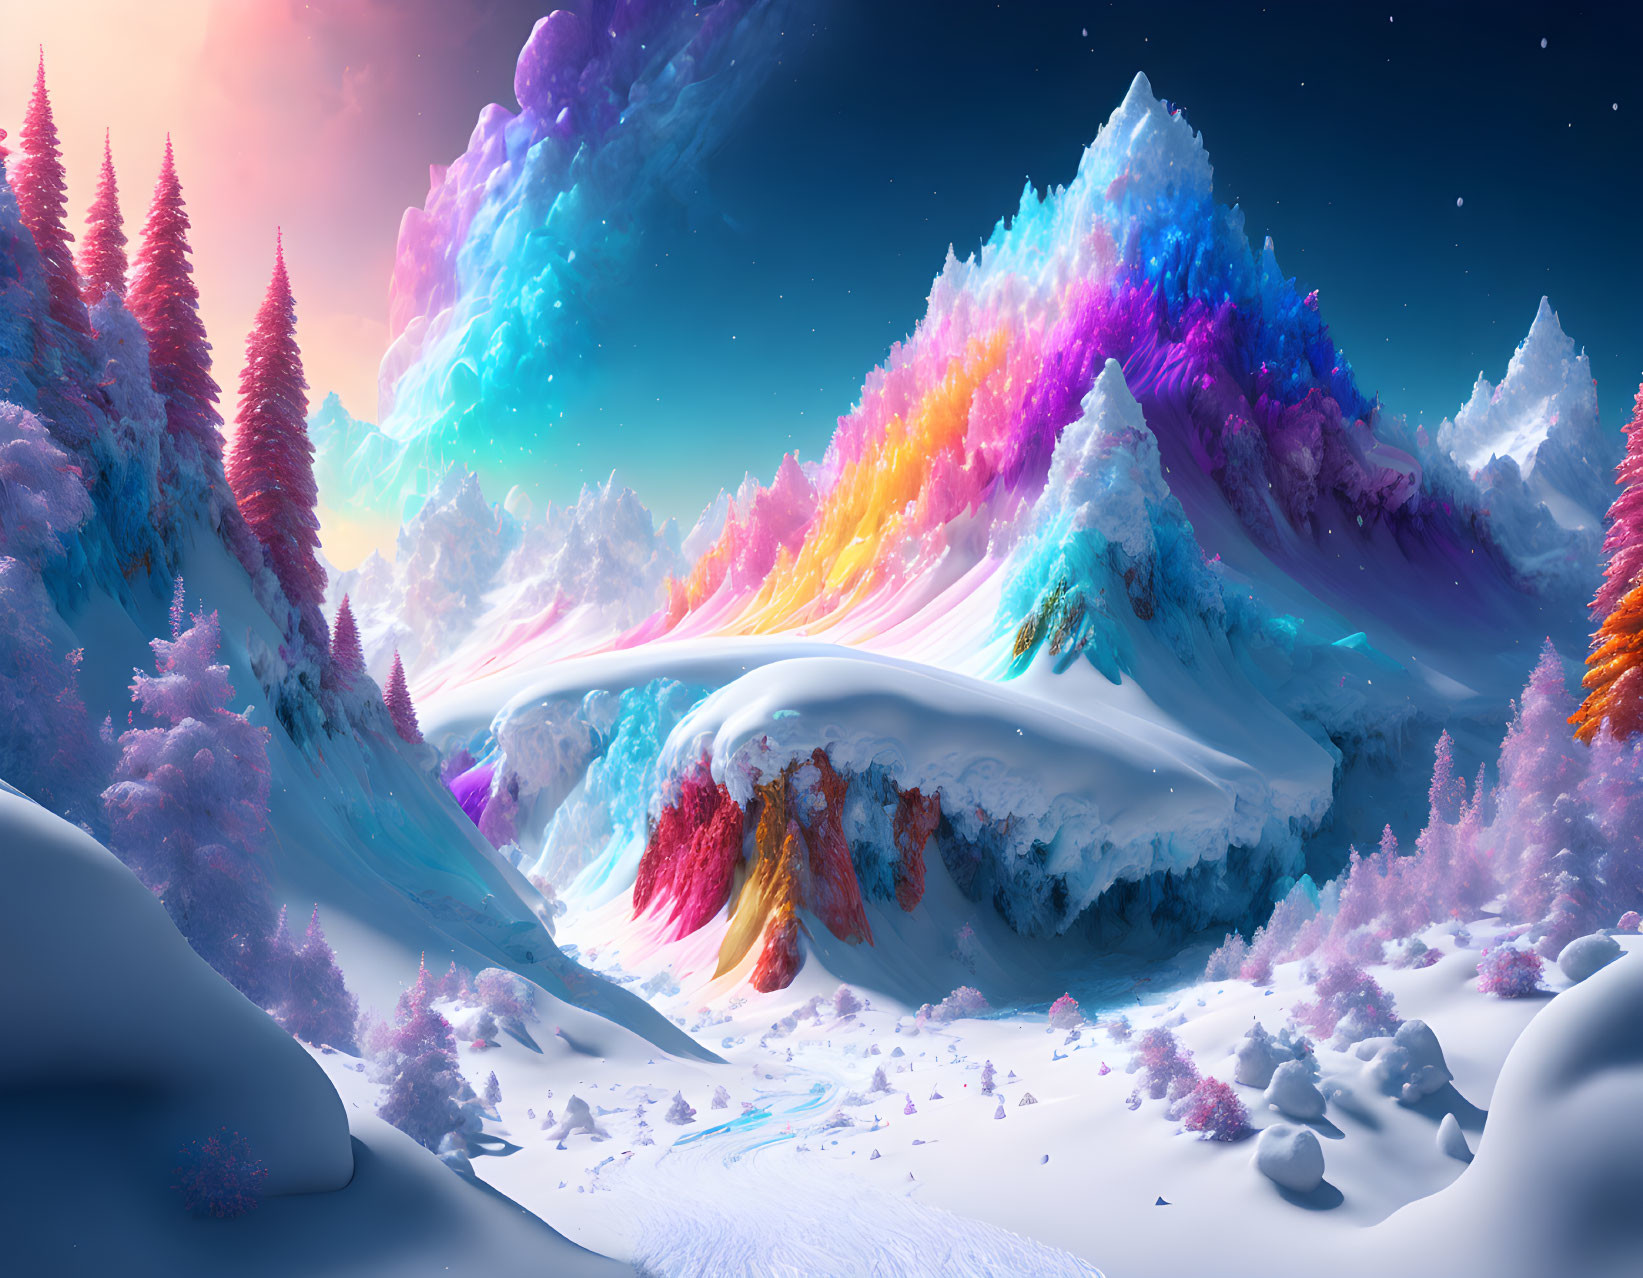 Colorful Snow-Covered Mountains in Fantasy Landscape